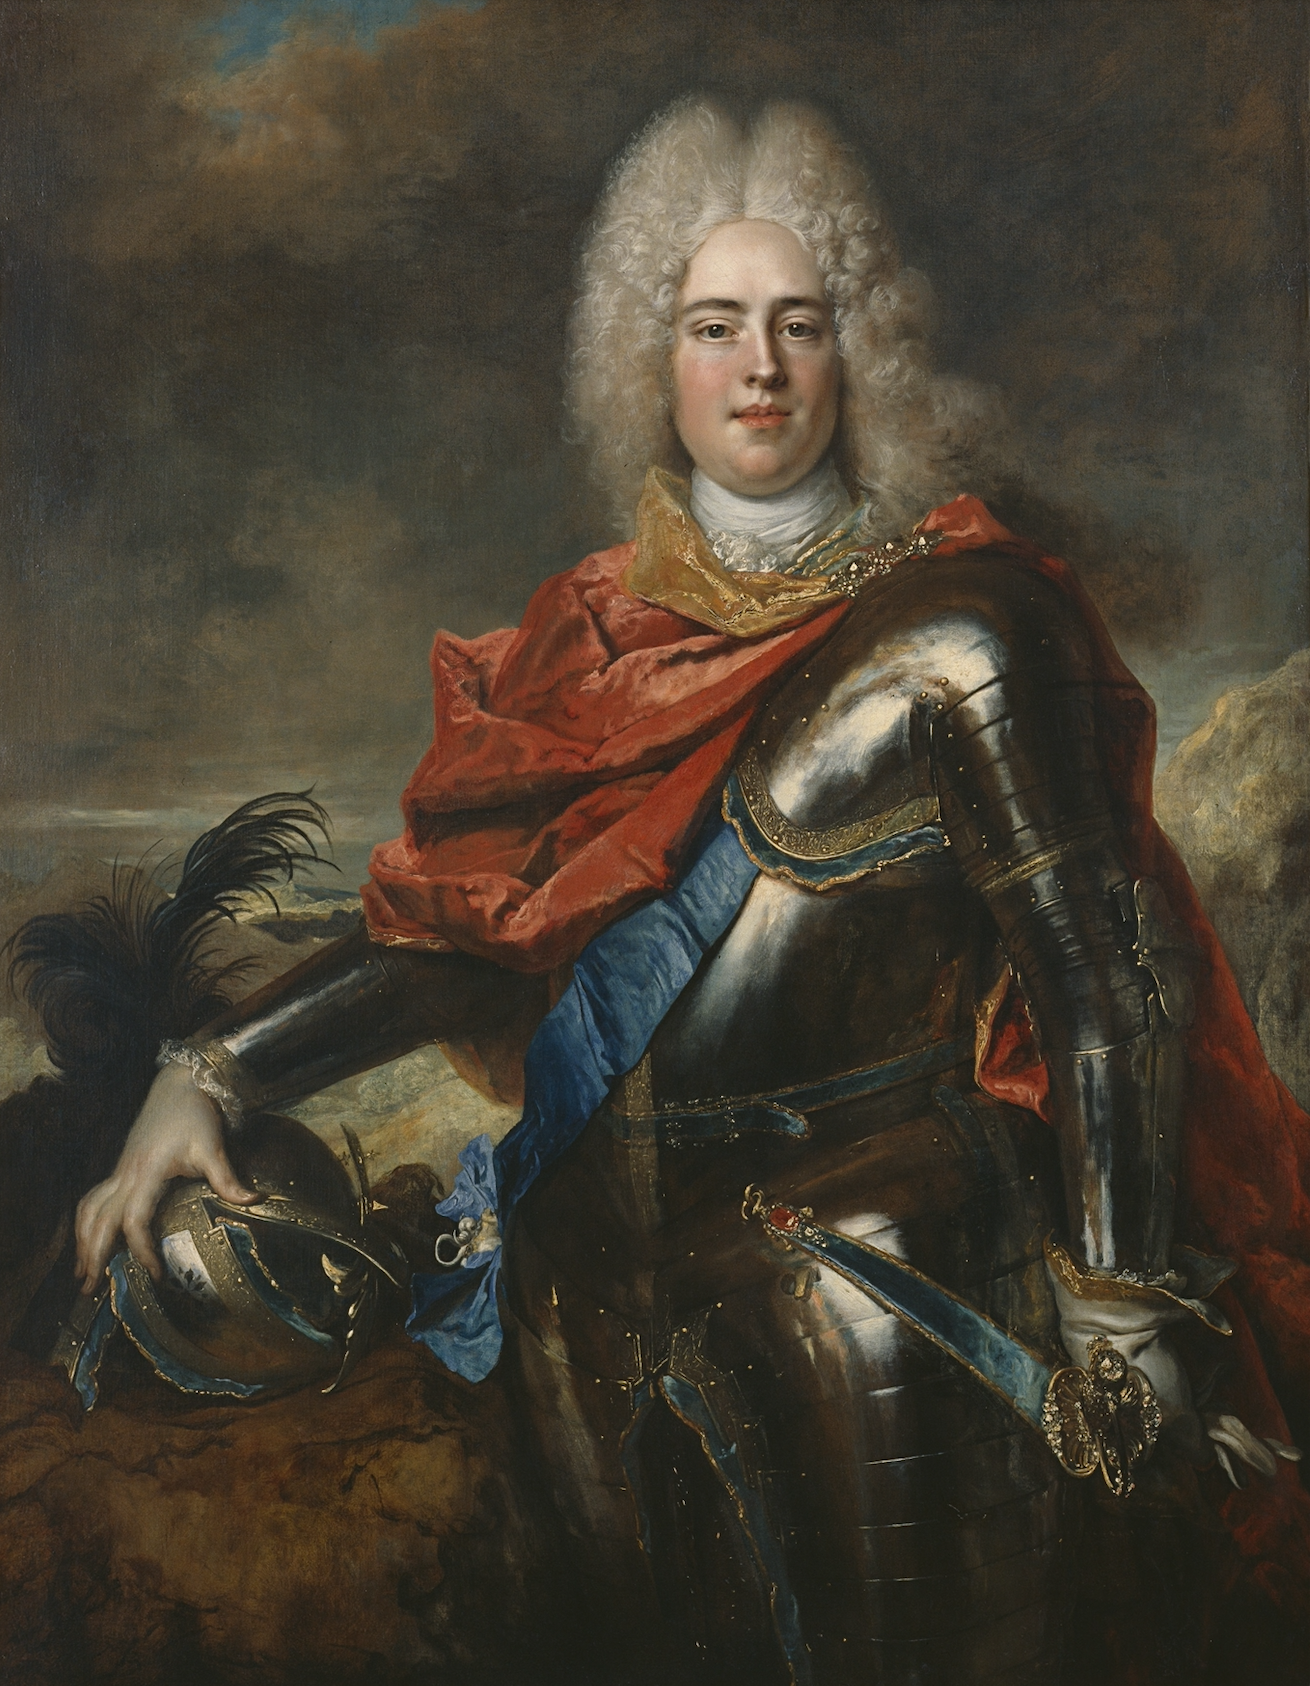 A portrait of a pale-skin-toned man in silver armor with gold accents around each plate’s edge. The man has a bright red cape wrapped around his neck and going over his back, while a blue stash crosses over their heart.  He wears a while glove on his left hand as it rests on a hold sword hilt. His right hand holds onto a metal helmet with a large black feather plume. The background constants of gray and brown clouds covering a blue sky. On the ground, there is a variety of rocky terrain.